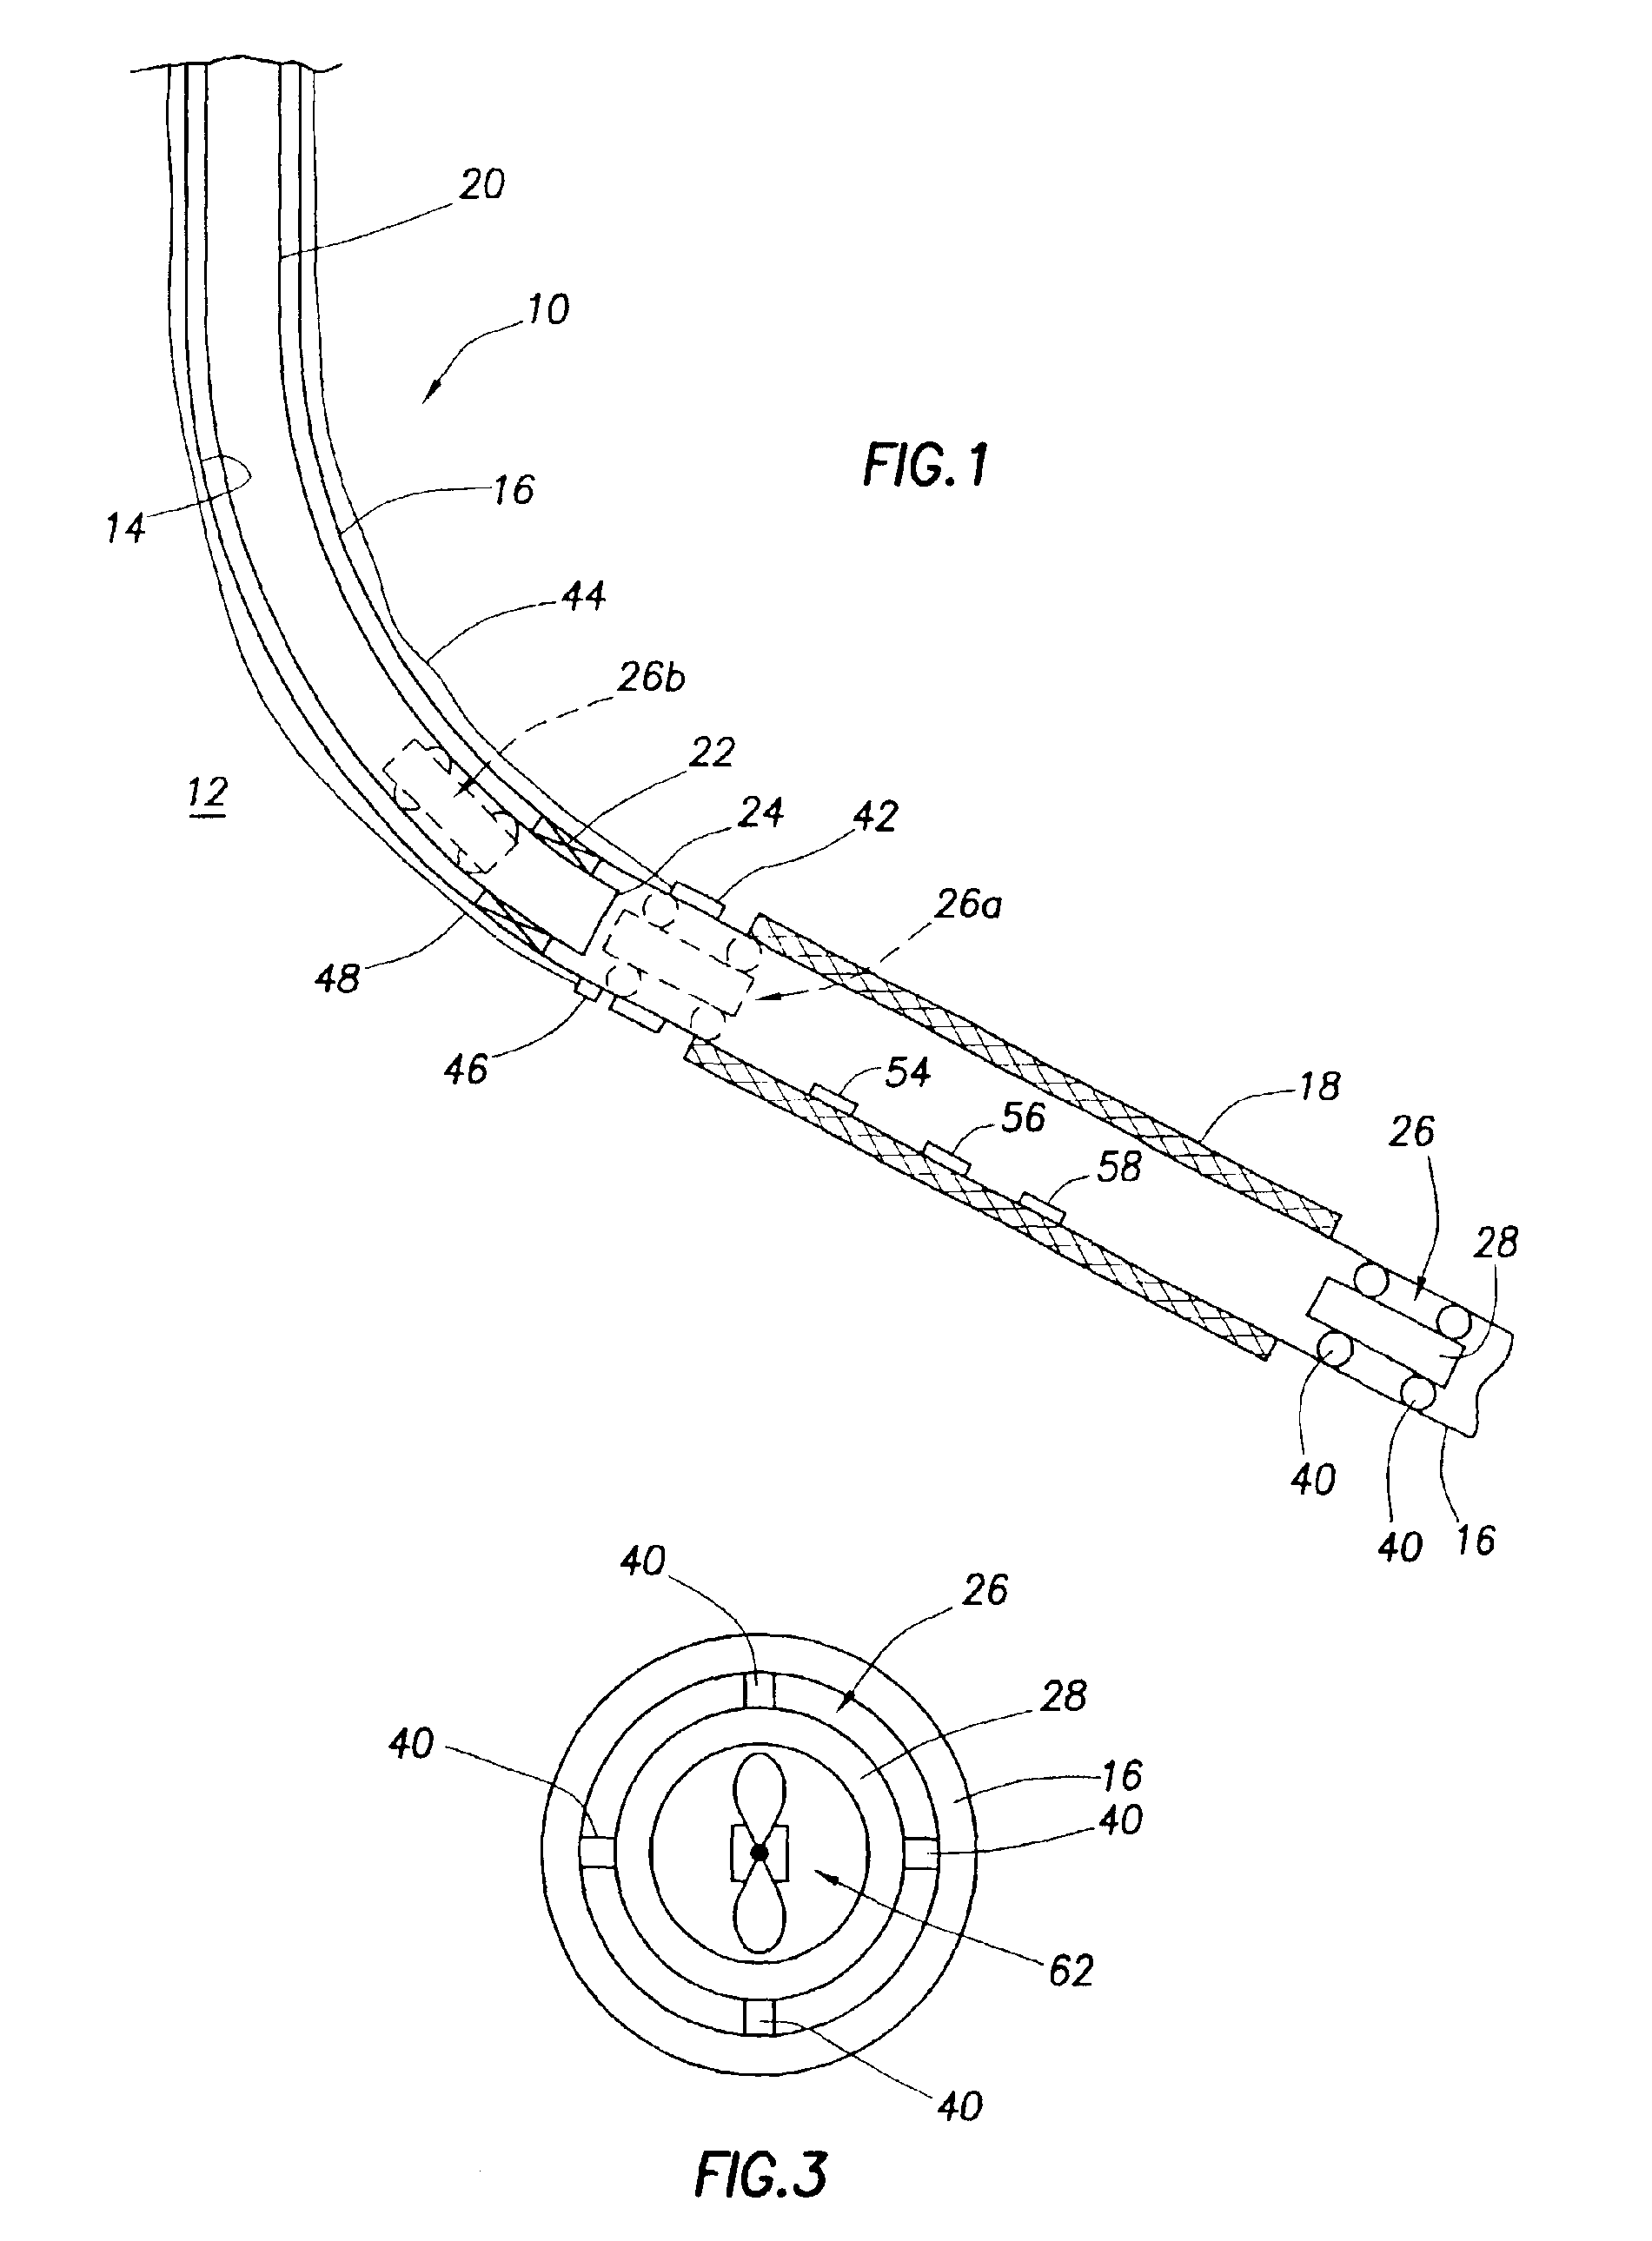 Subterranean well completion incorporating downhole-parkable robot therein